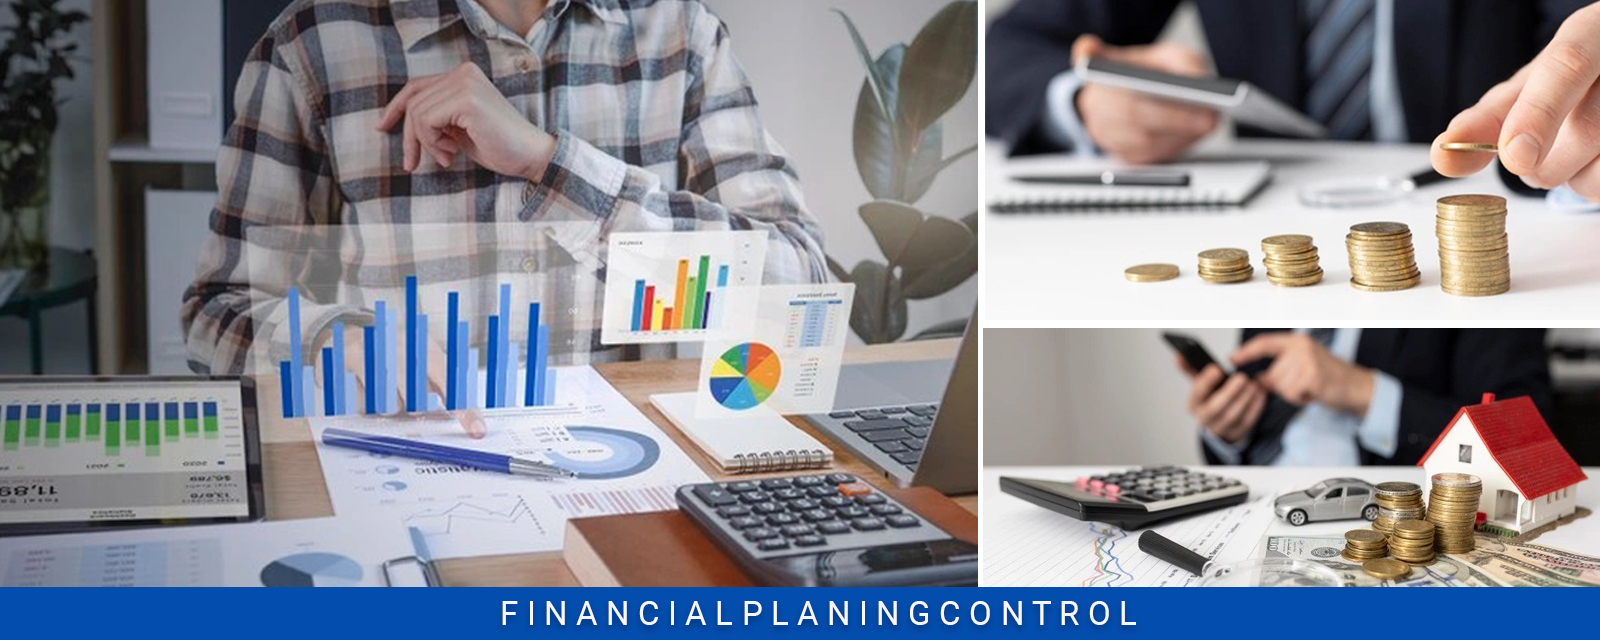 Financial Planing Control